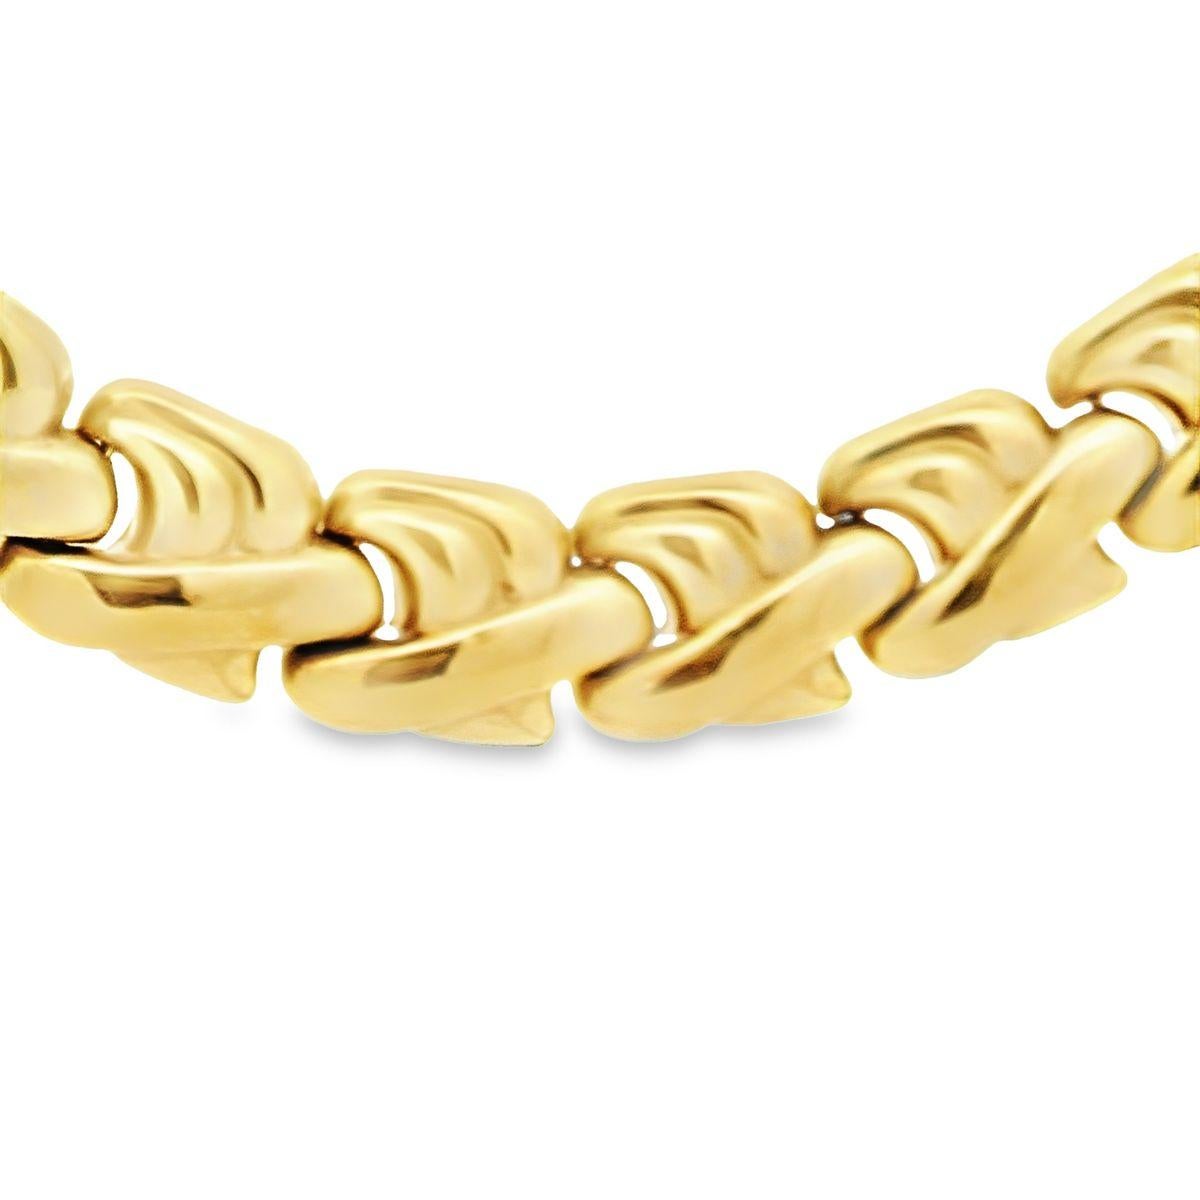 Add the finishing touch with our Italian made statement necklace offered by Alex & Co. This 14 karat yellow gold wear-anywhere piece, Circa 1980, features an abstract 